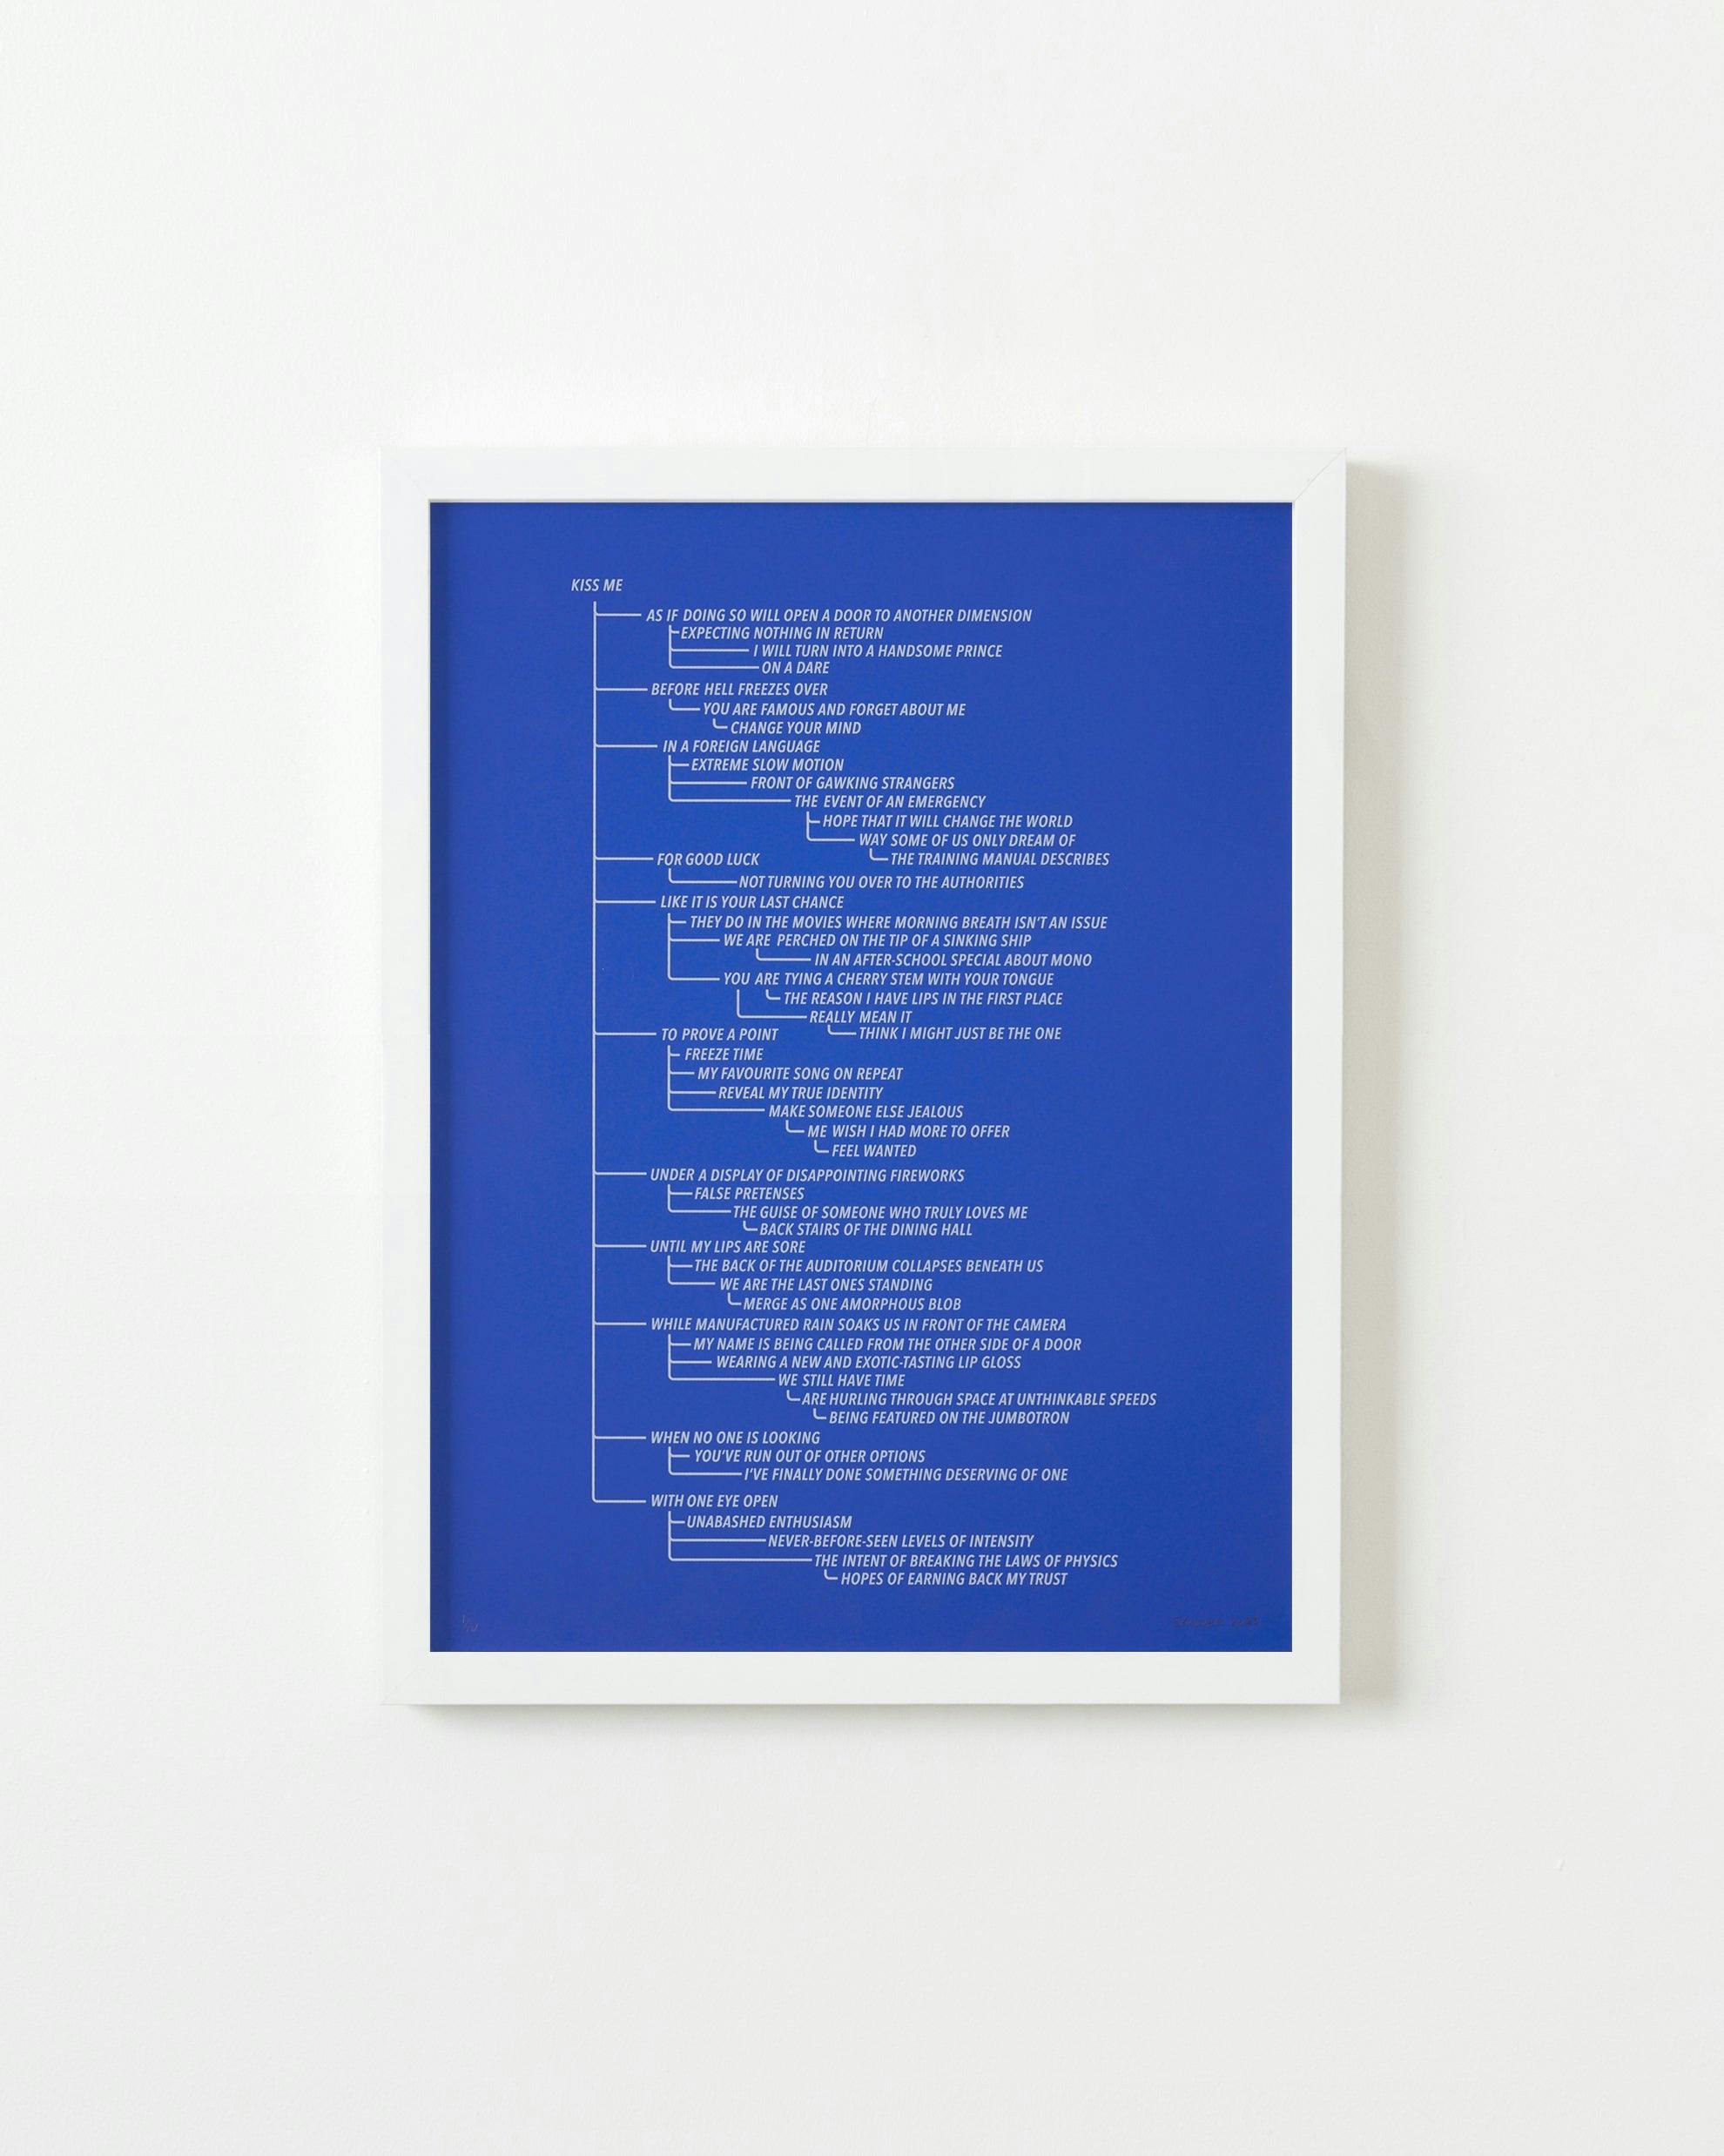 Print by Ben Skinner titled "Blue 5. From the Kiss Me Flow Chart (Blue Series)".